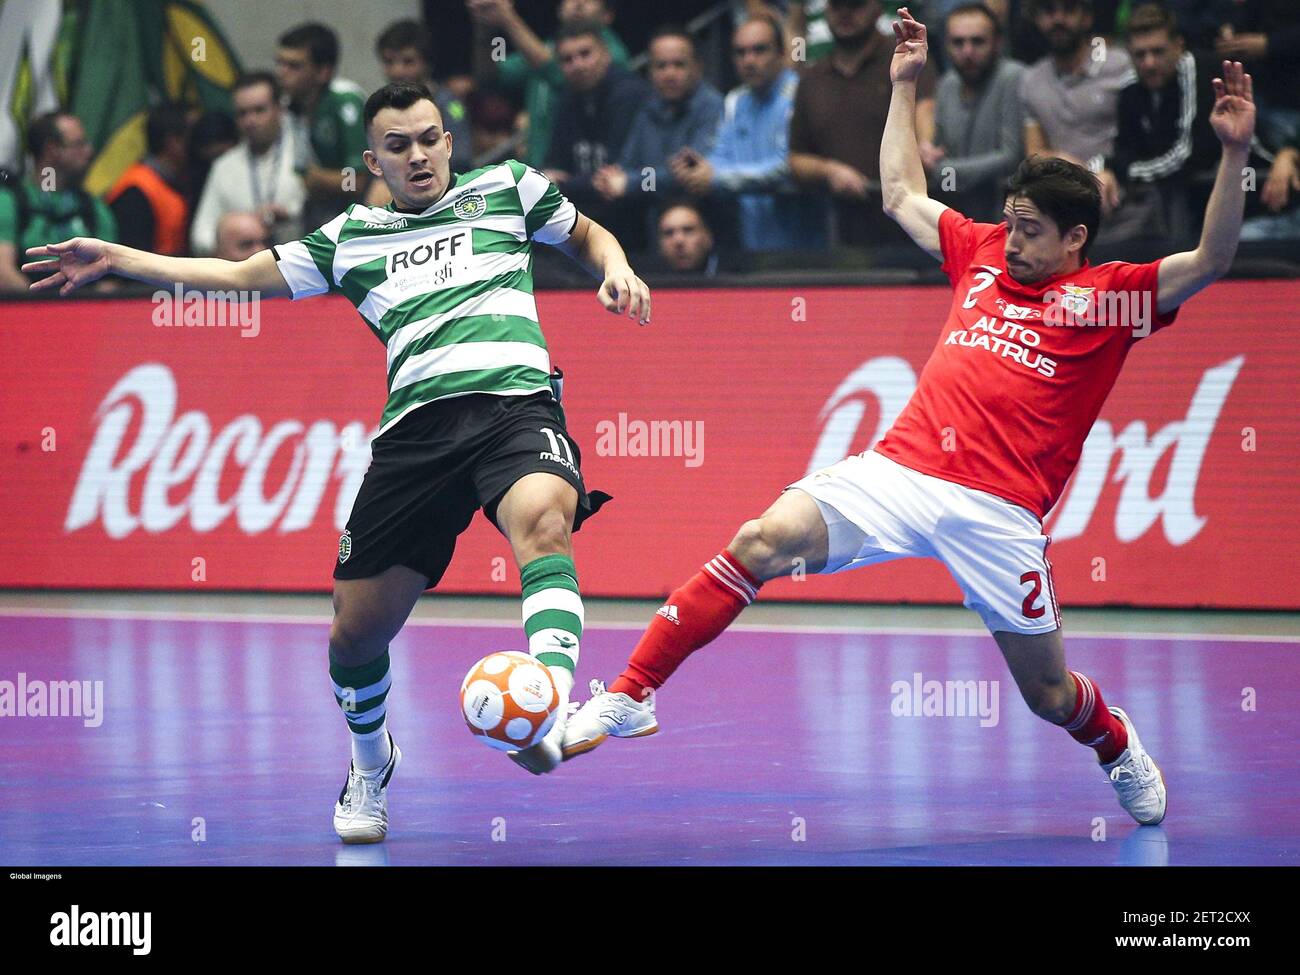 Lisbon, 18/11/2018 - Sporting Clube de Portugal played this evening with  Sport Lisboa e Benfica in the João Rocha pavilion, in the match for the 3rd  round of Group C of the